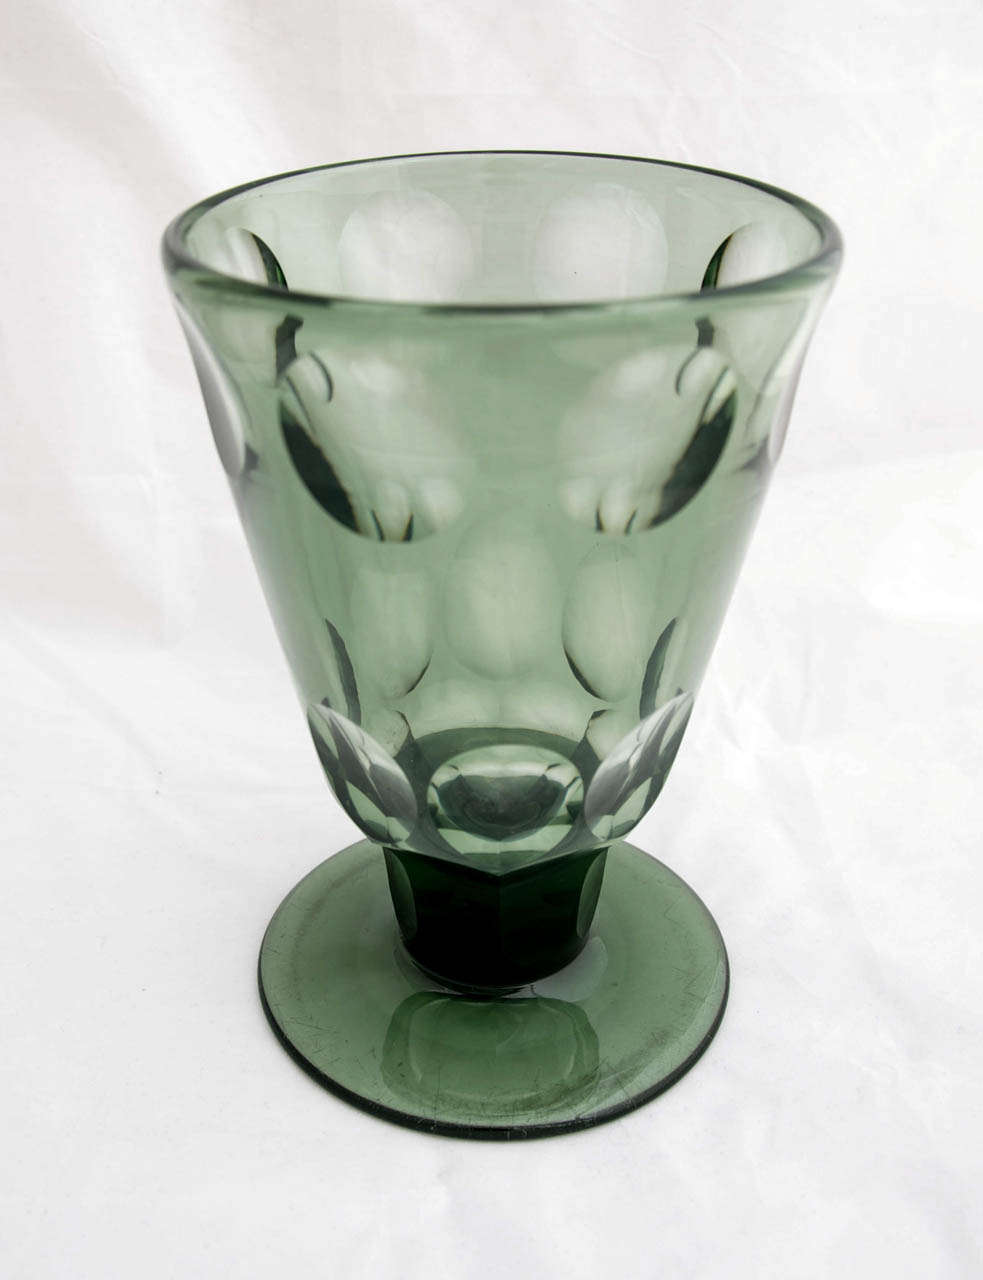 This is a striking and rare piece of 1930's design by the great Keith Murray. In green crystal, the chalice is 20cm tall and 13.5cm in diameter. Made by Stevens & Williams in Stourbridge, UK (pattern number 695a), the broad stem is slice cut with 6